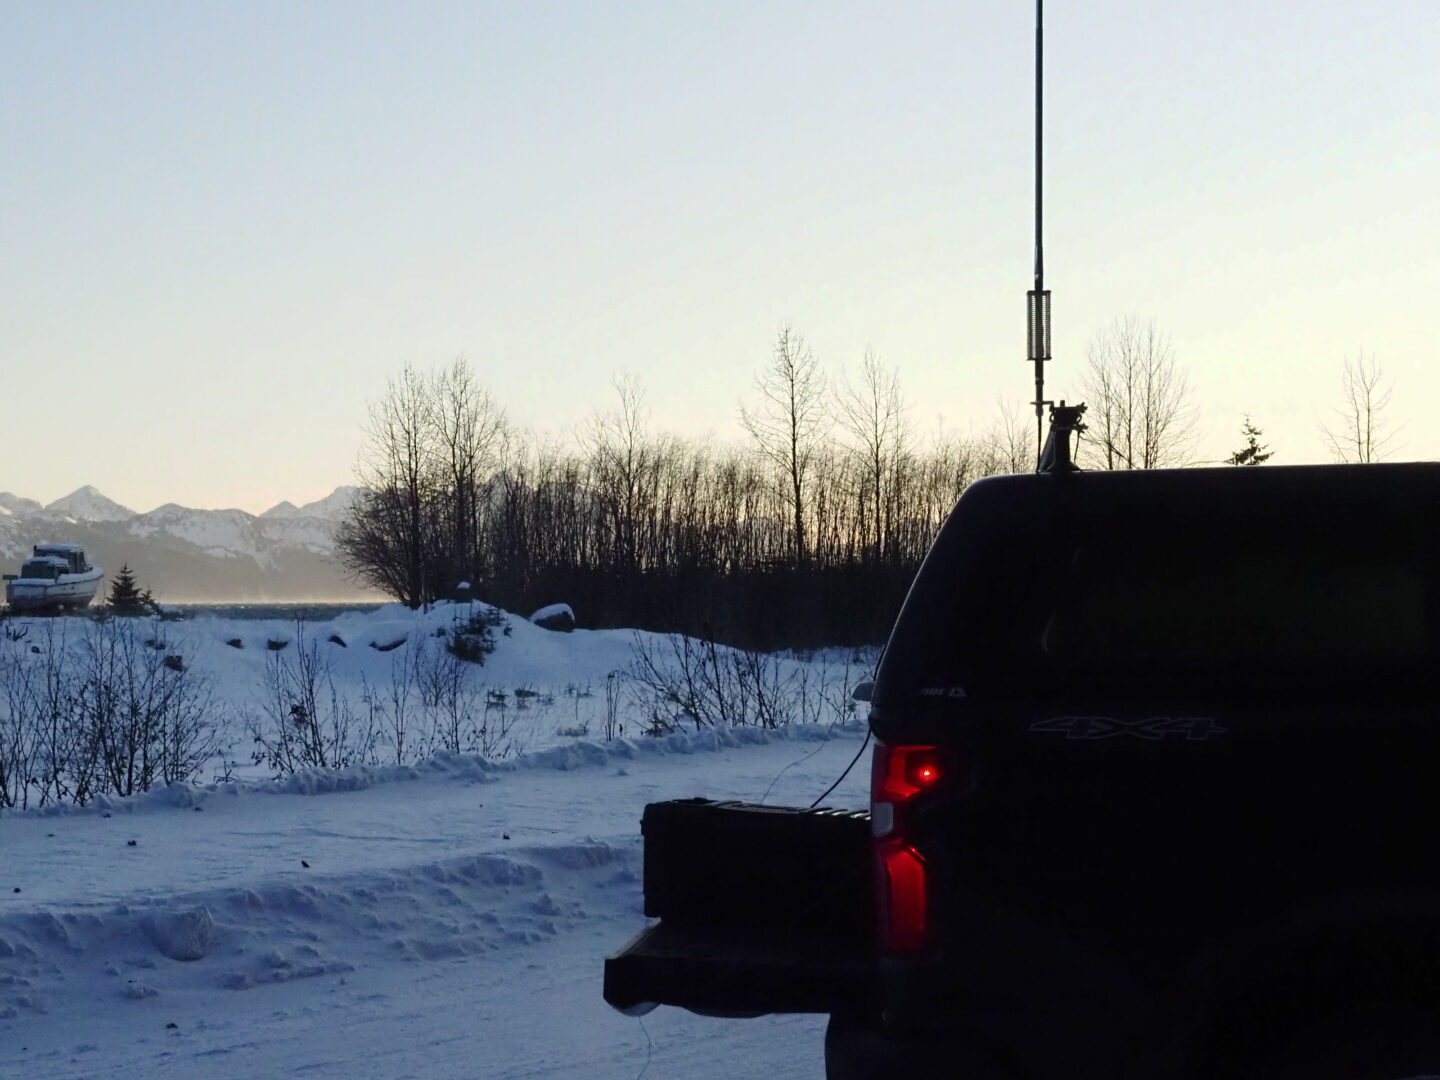 Antenna and truck in silhouette in winter